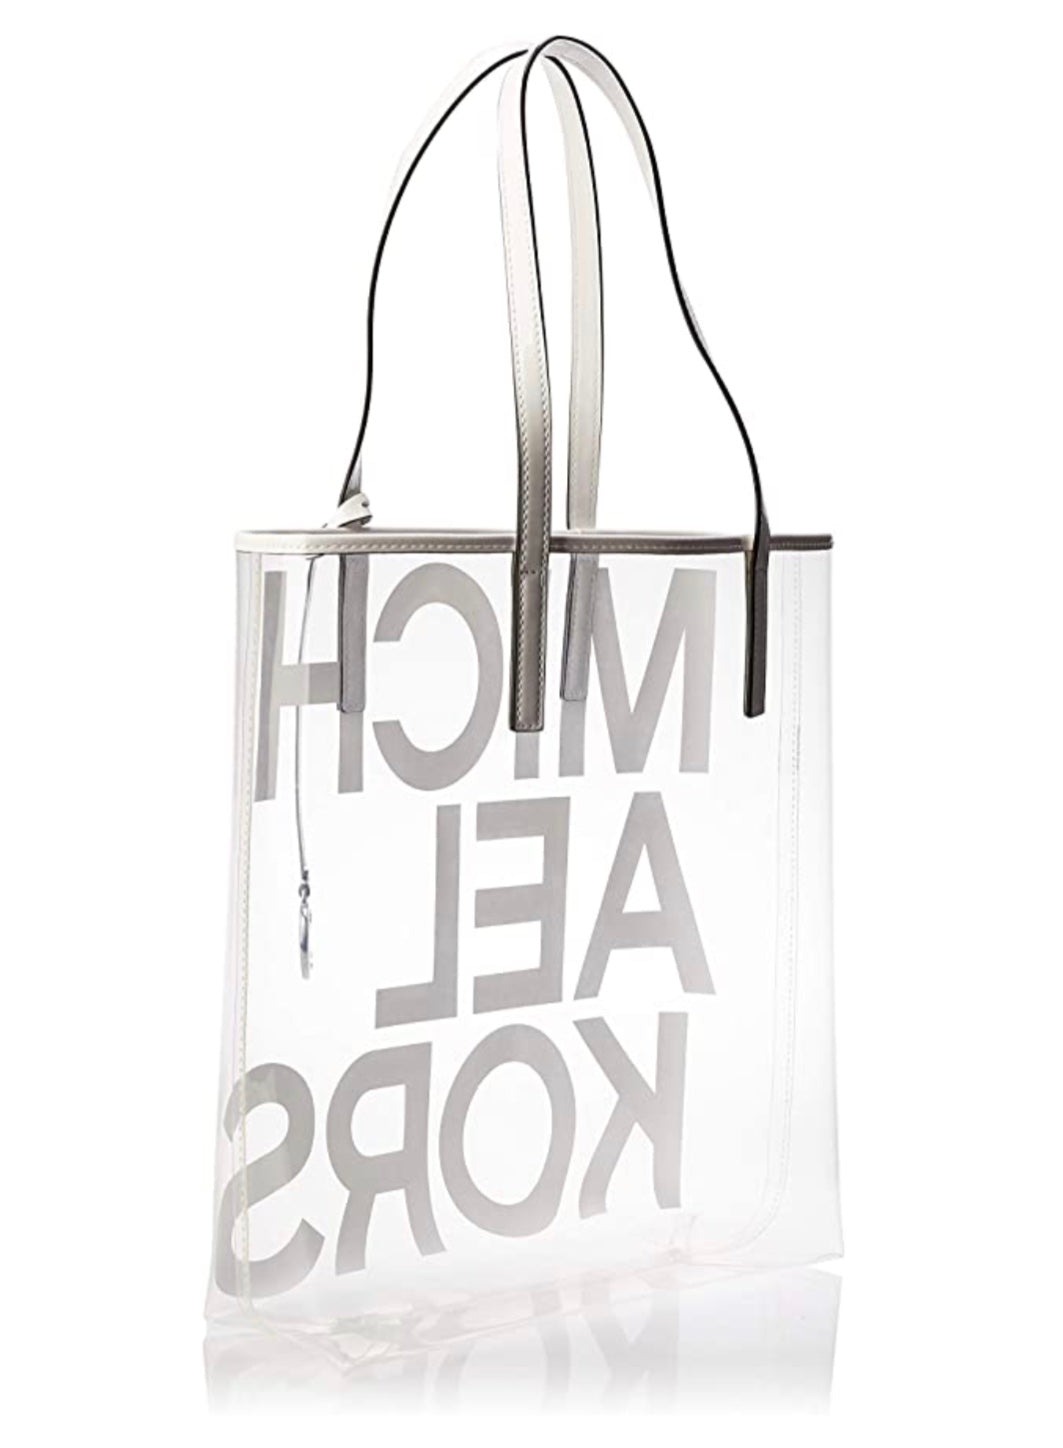 The Michael Large Graphic Logo Clear Tote Bag